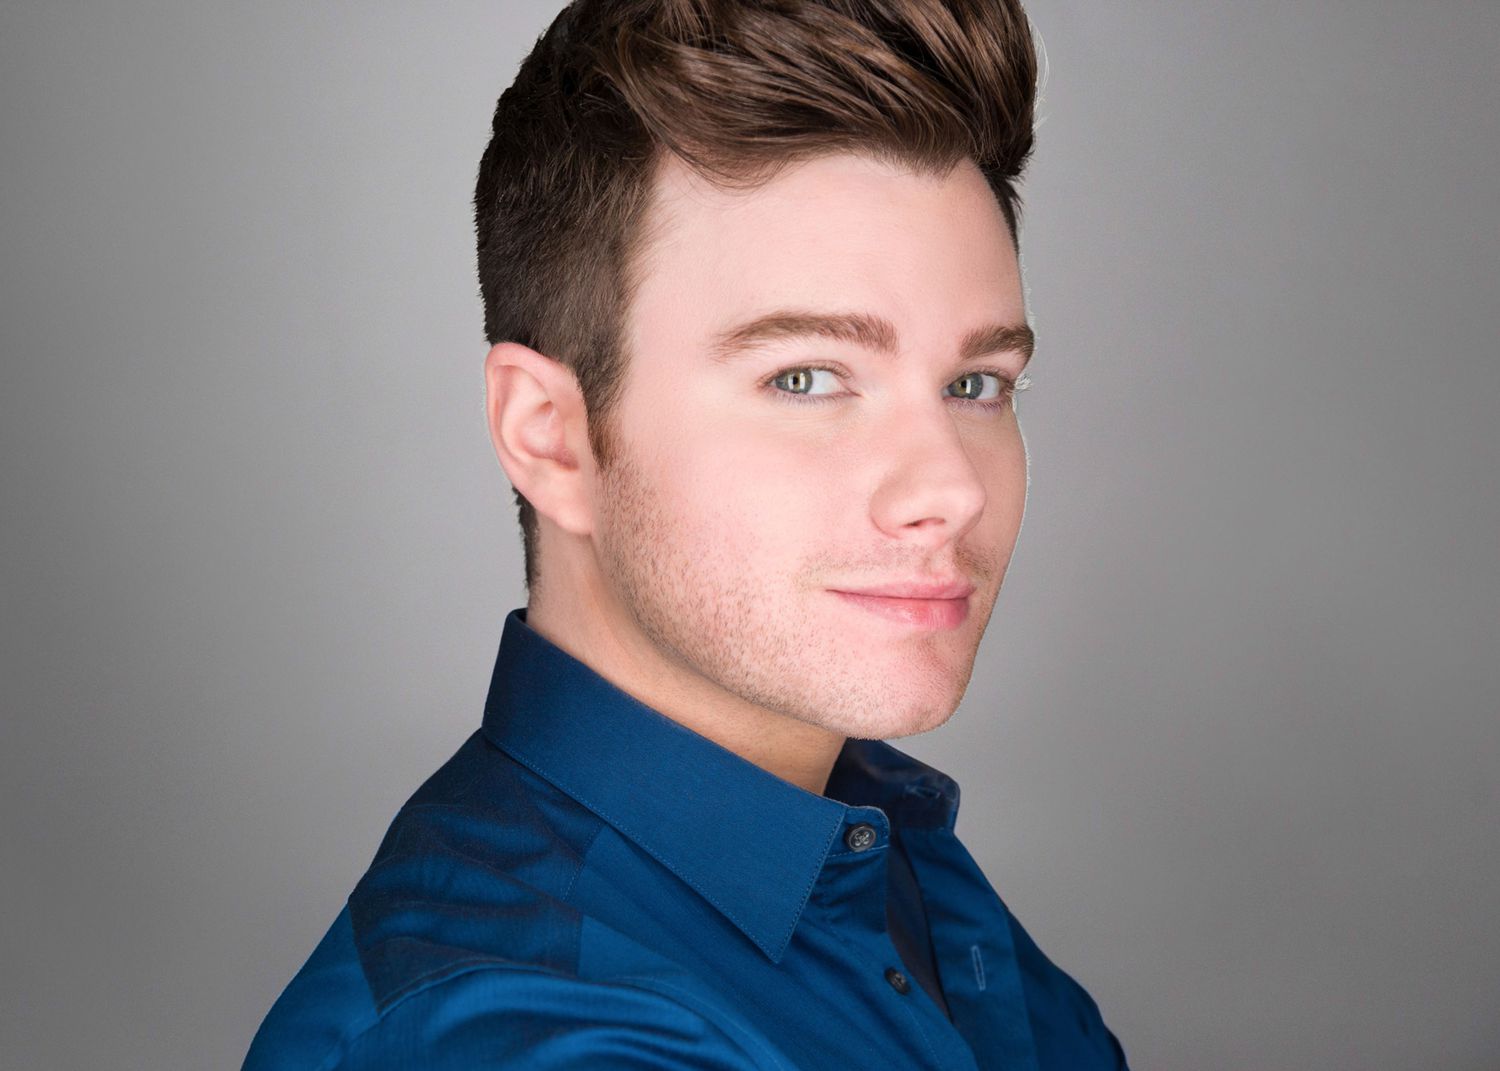 Glee's Chris Colfer On Why Goldilocks is So Likable in His Graphic Novel:  'Her Heart is Just as Golden as Her Hair' | Parents